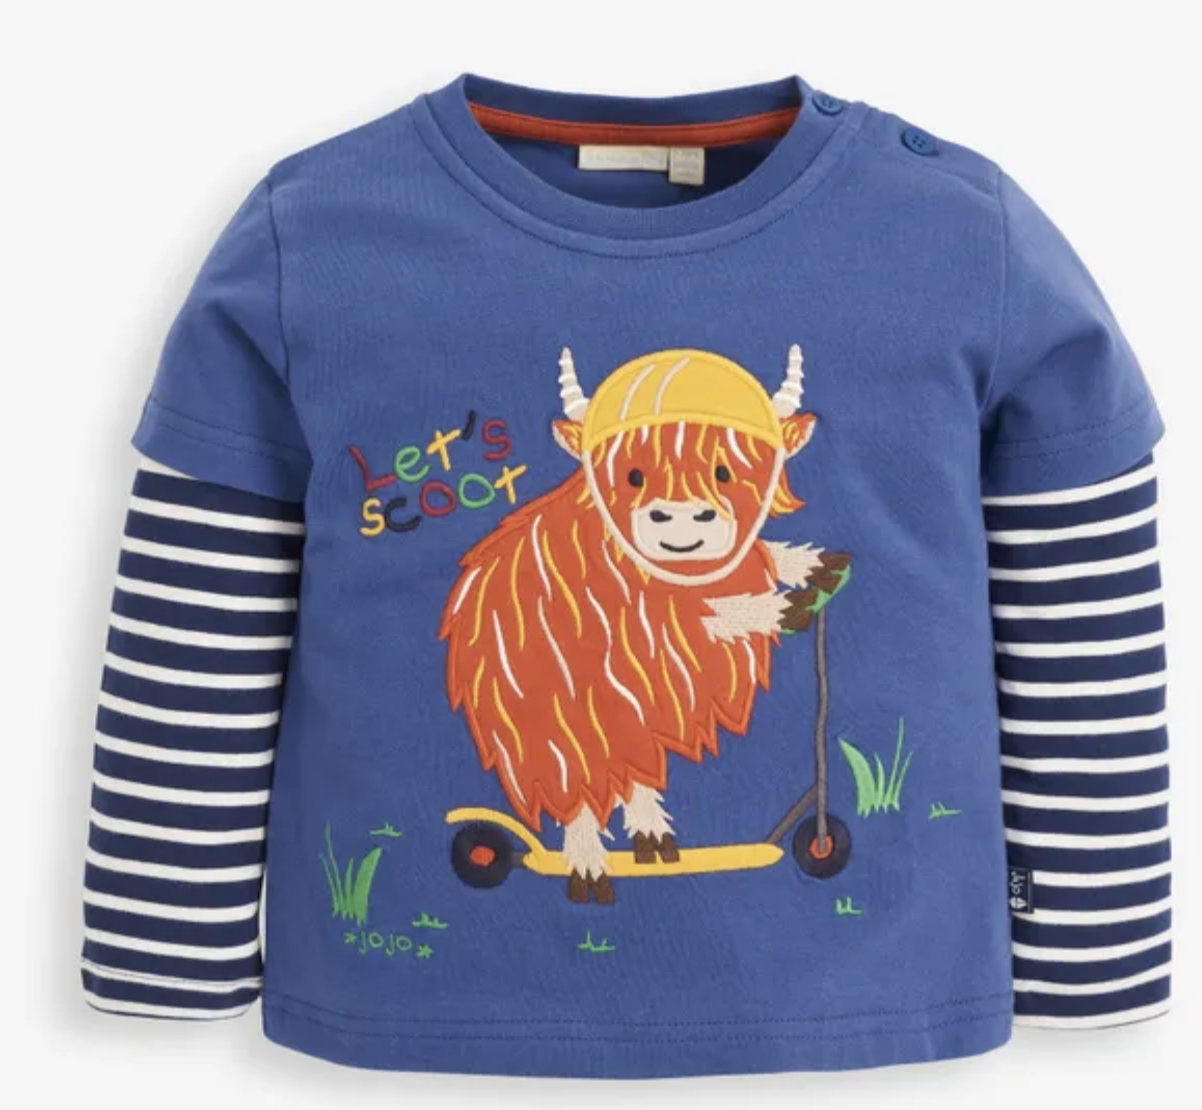 Scooting Highland Cow Applique Top IND56